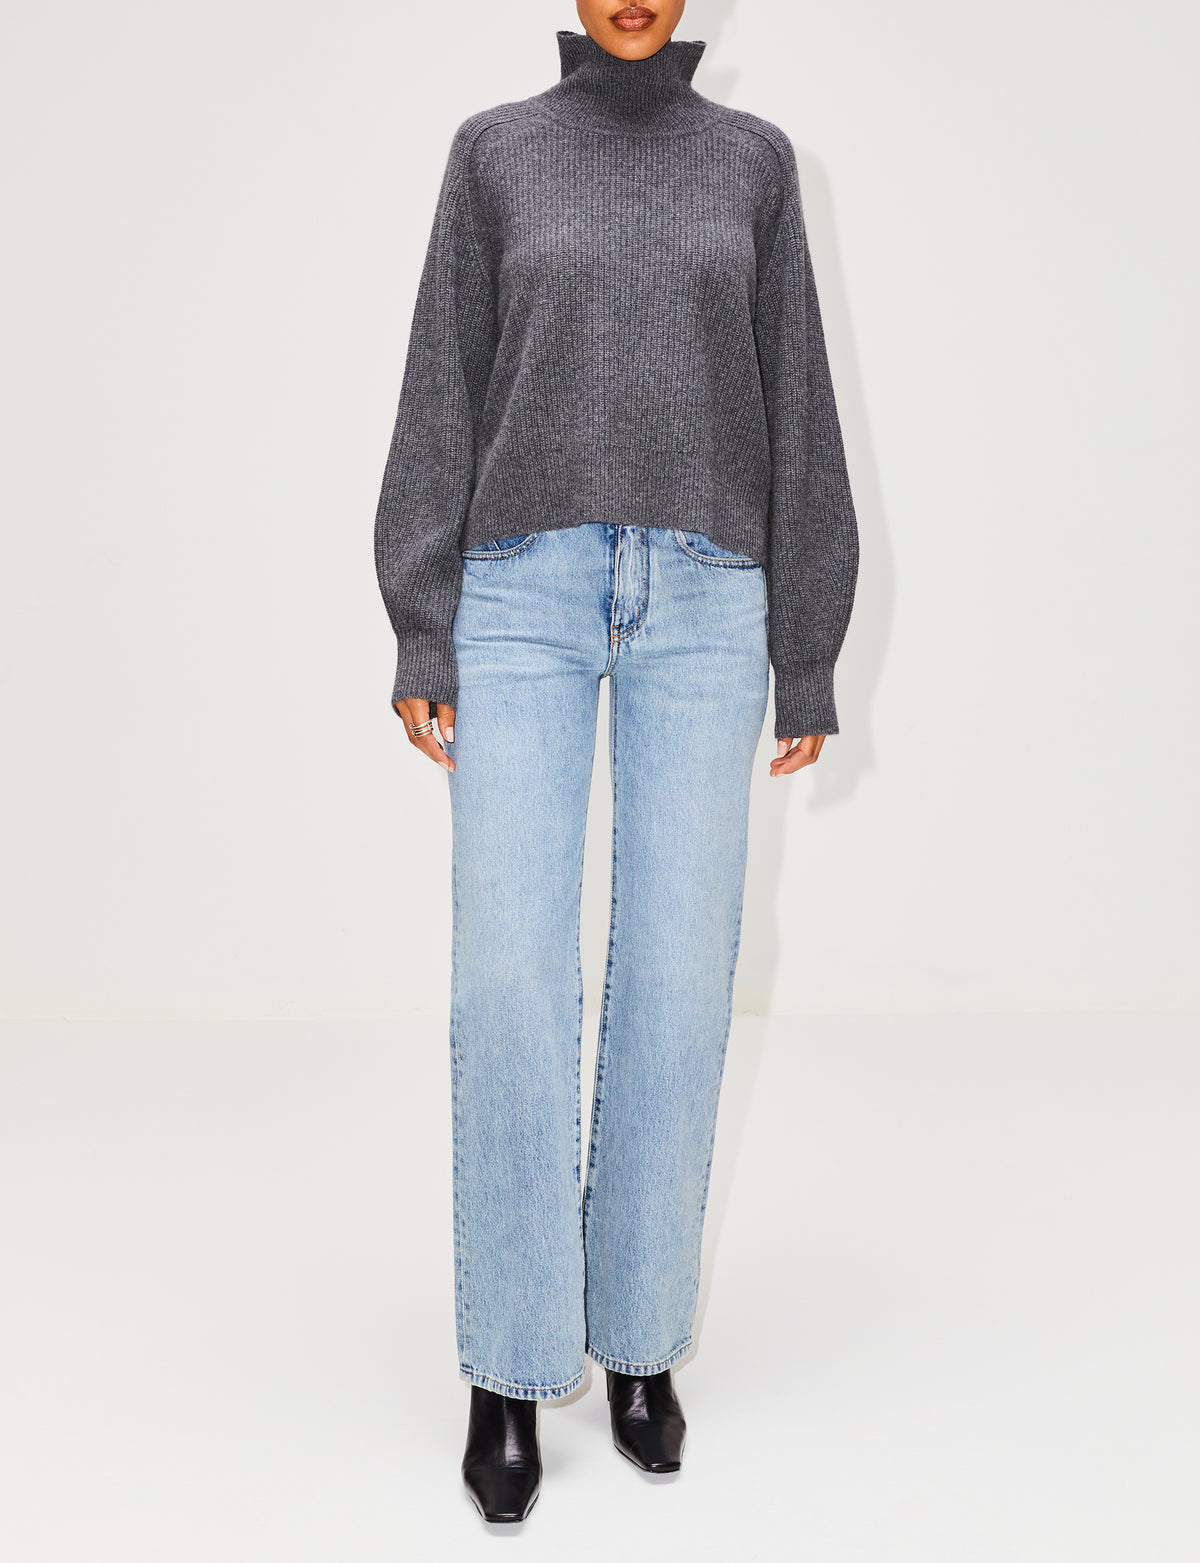 view 2 - Cropped Turtleneck Sweater